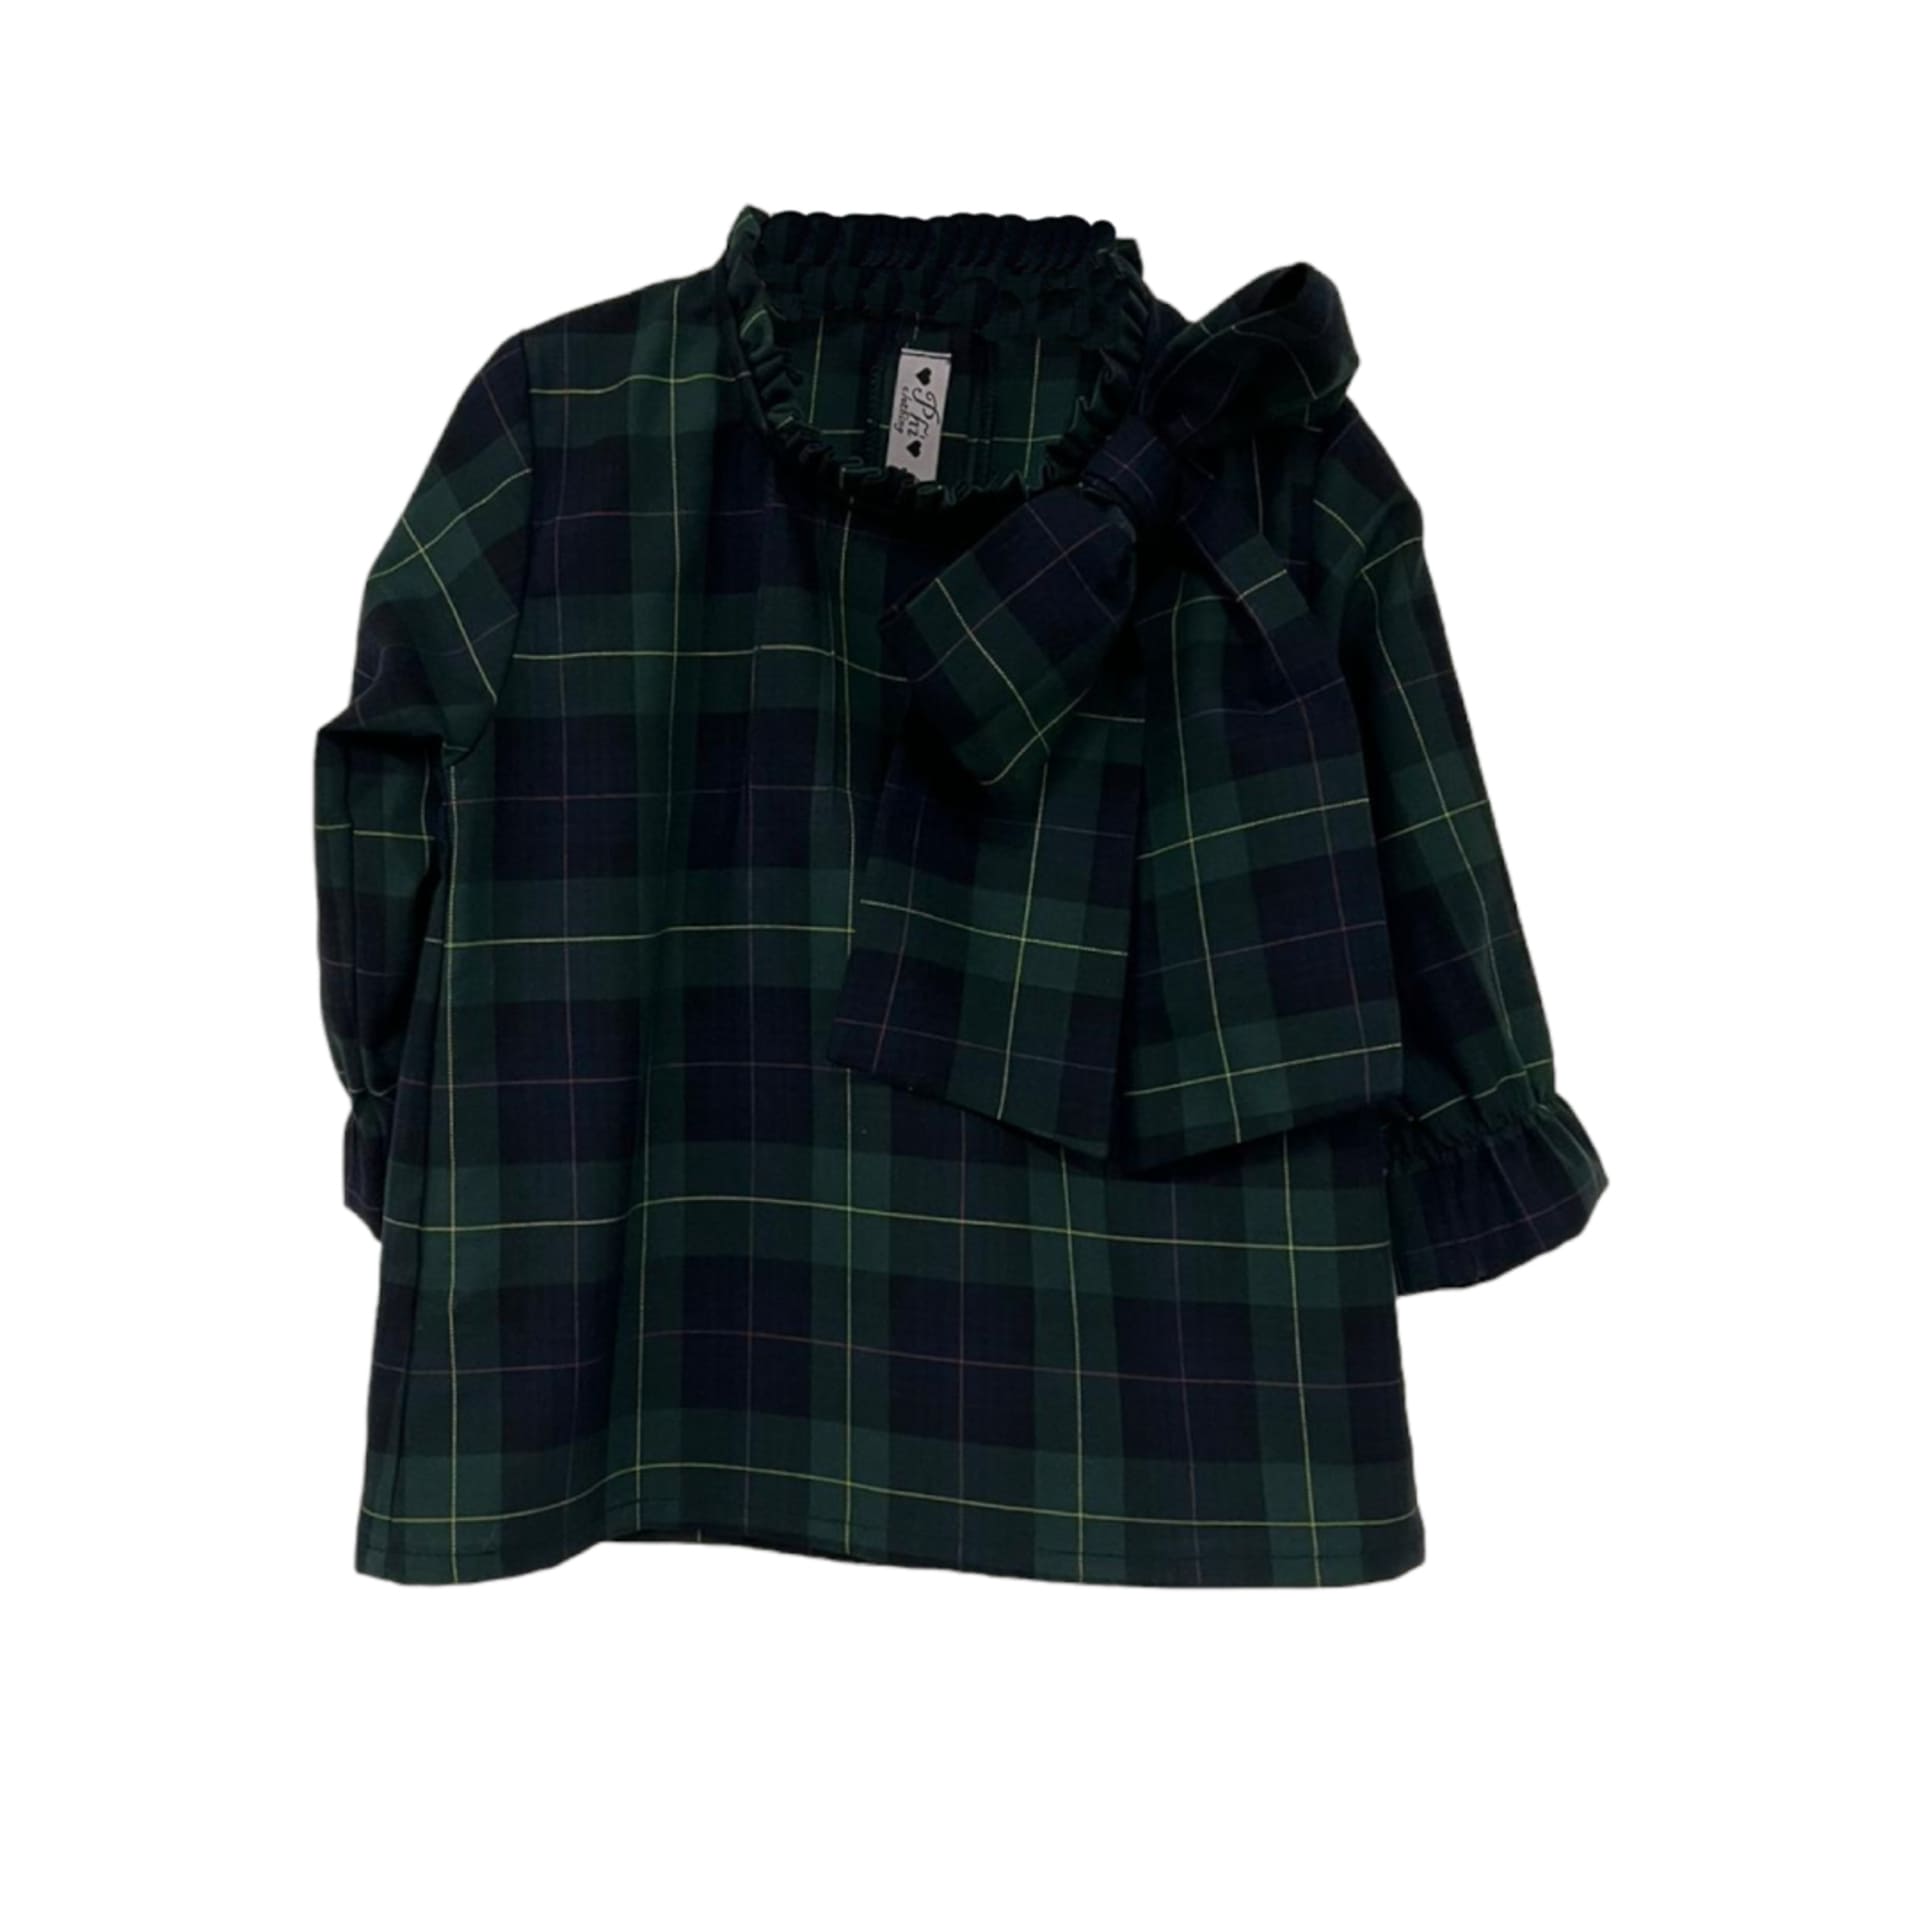 Green and blue tartan bow blouse